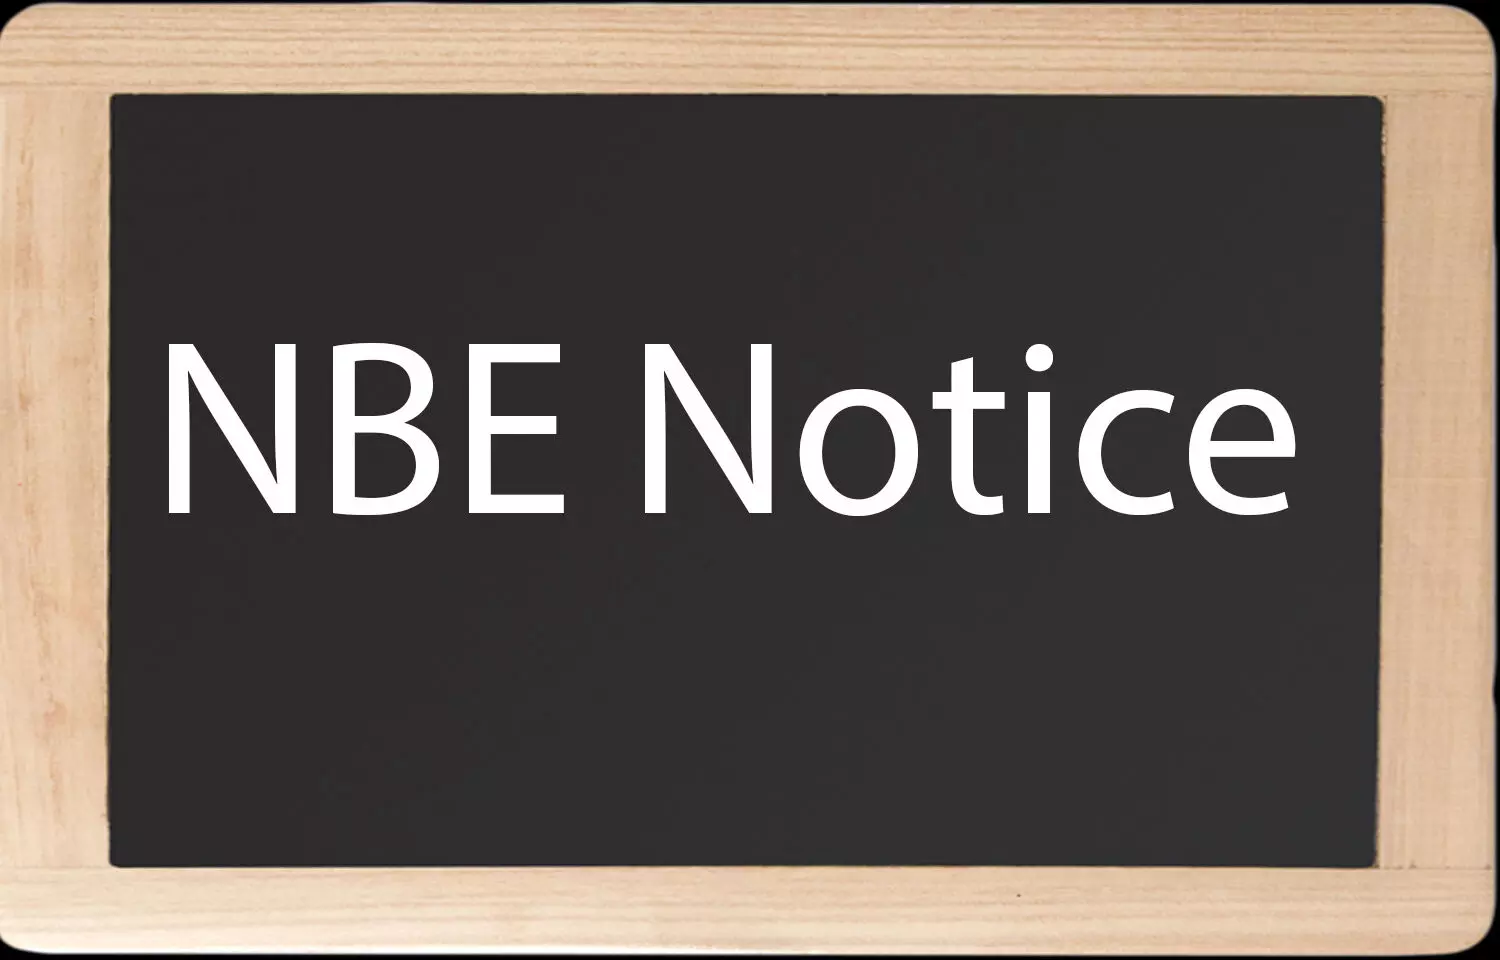 NBE issues conduct of DNB, DrNB practical exams December 2020 session